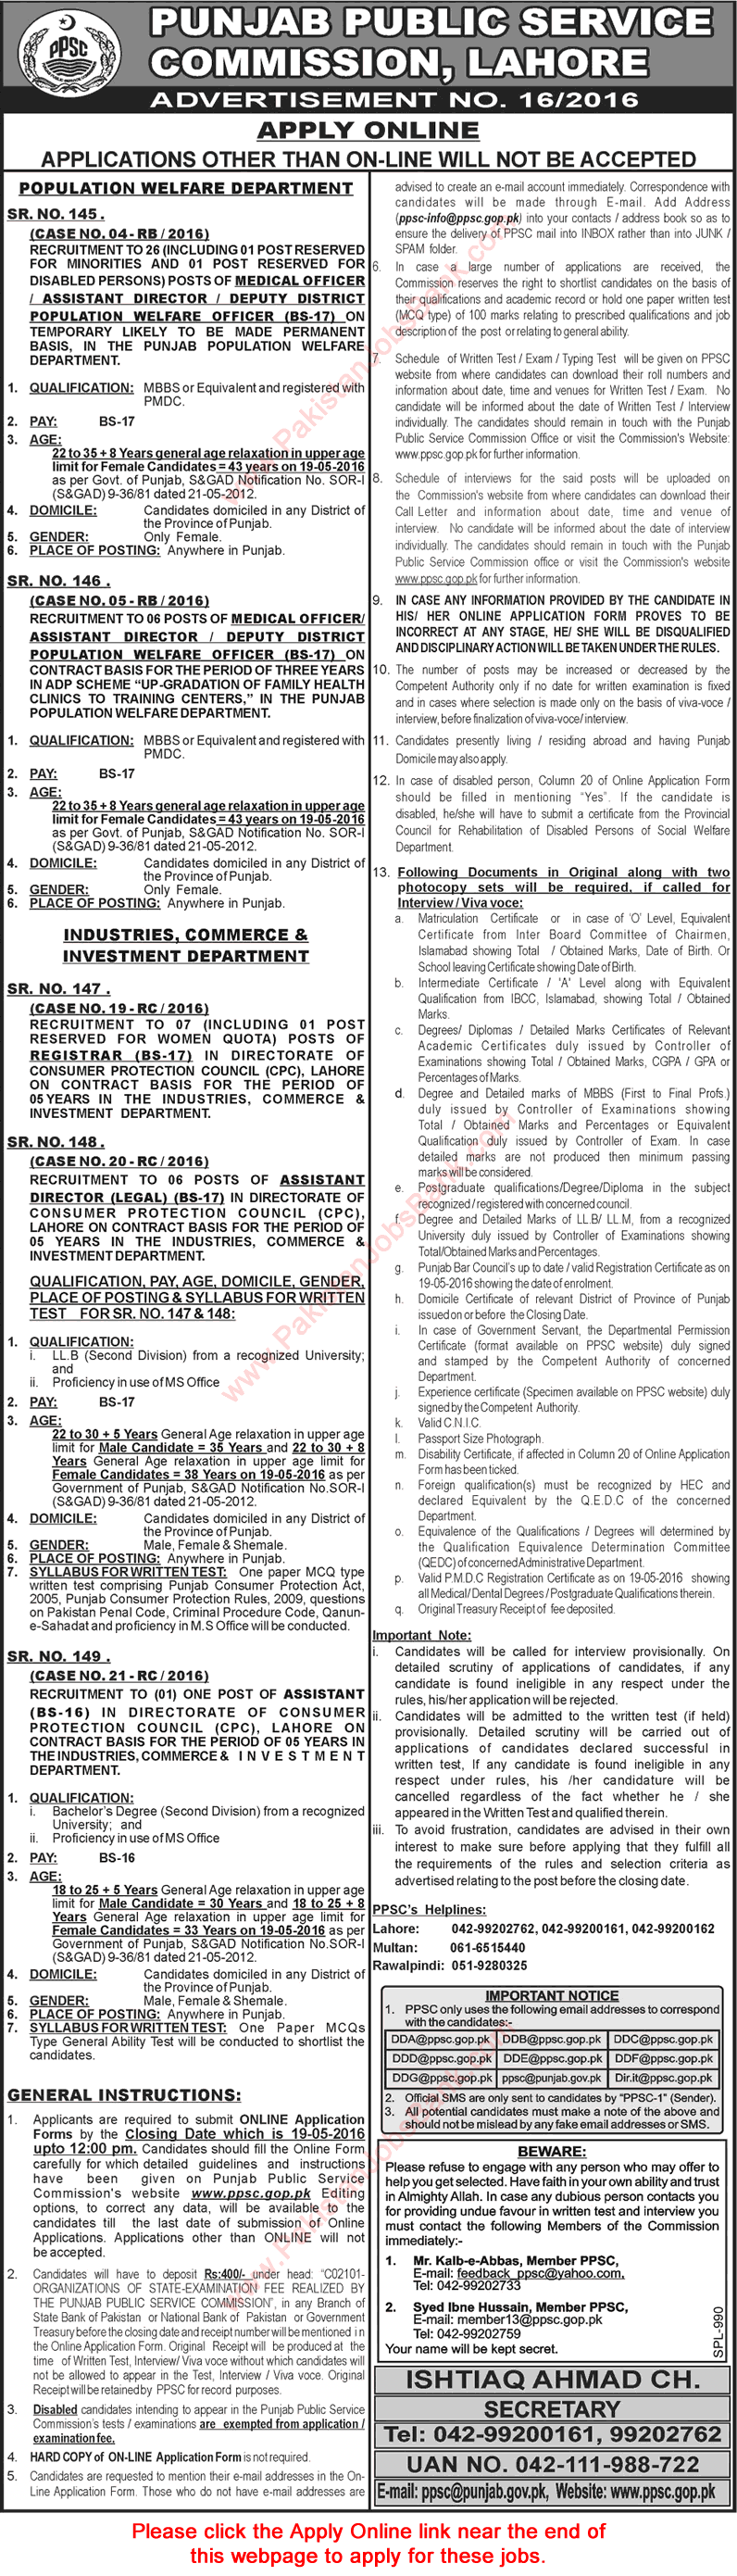 PPSC Jobs May 2016 Consolidated Advertisement No 16/2016 Apply Online Latest